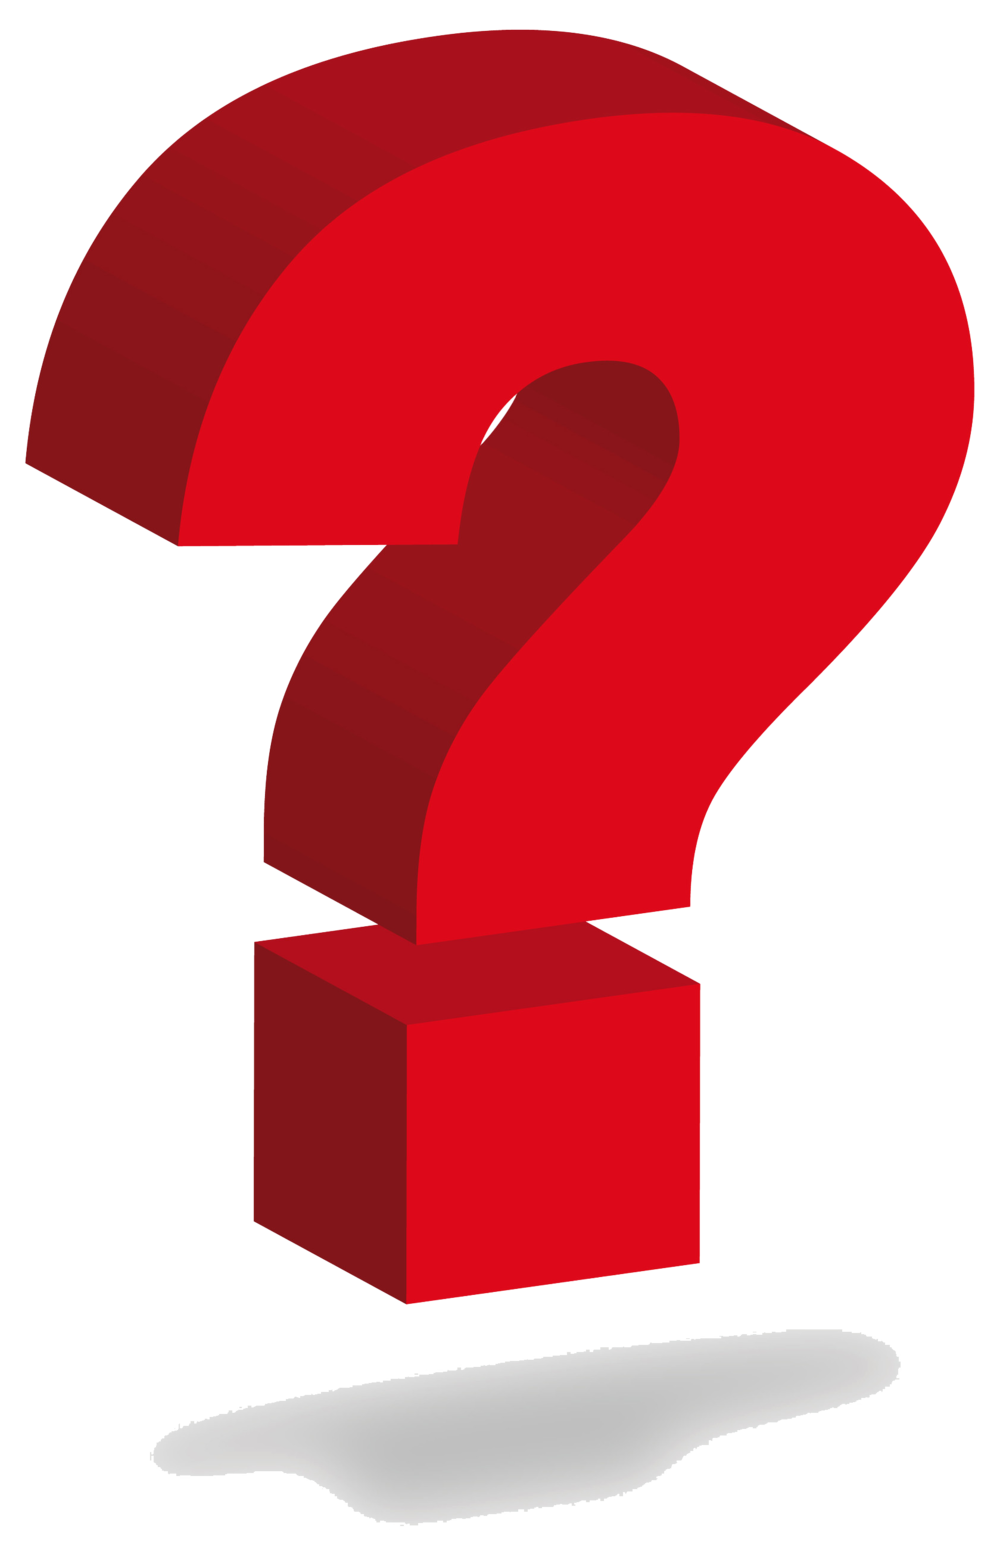 Question Mark Clip Art to Download - dbclipart.com